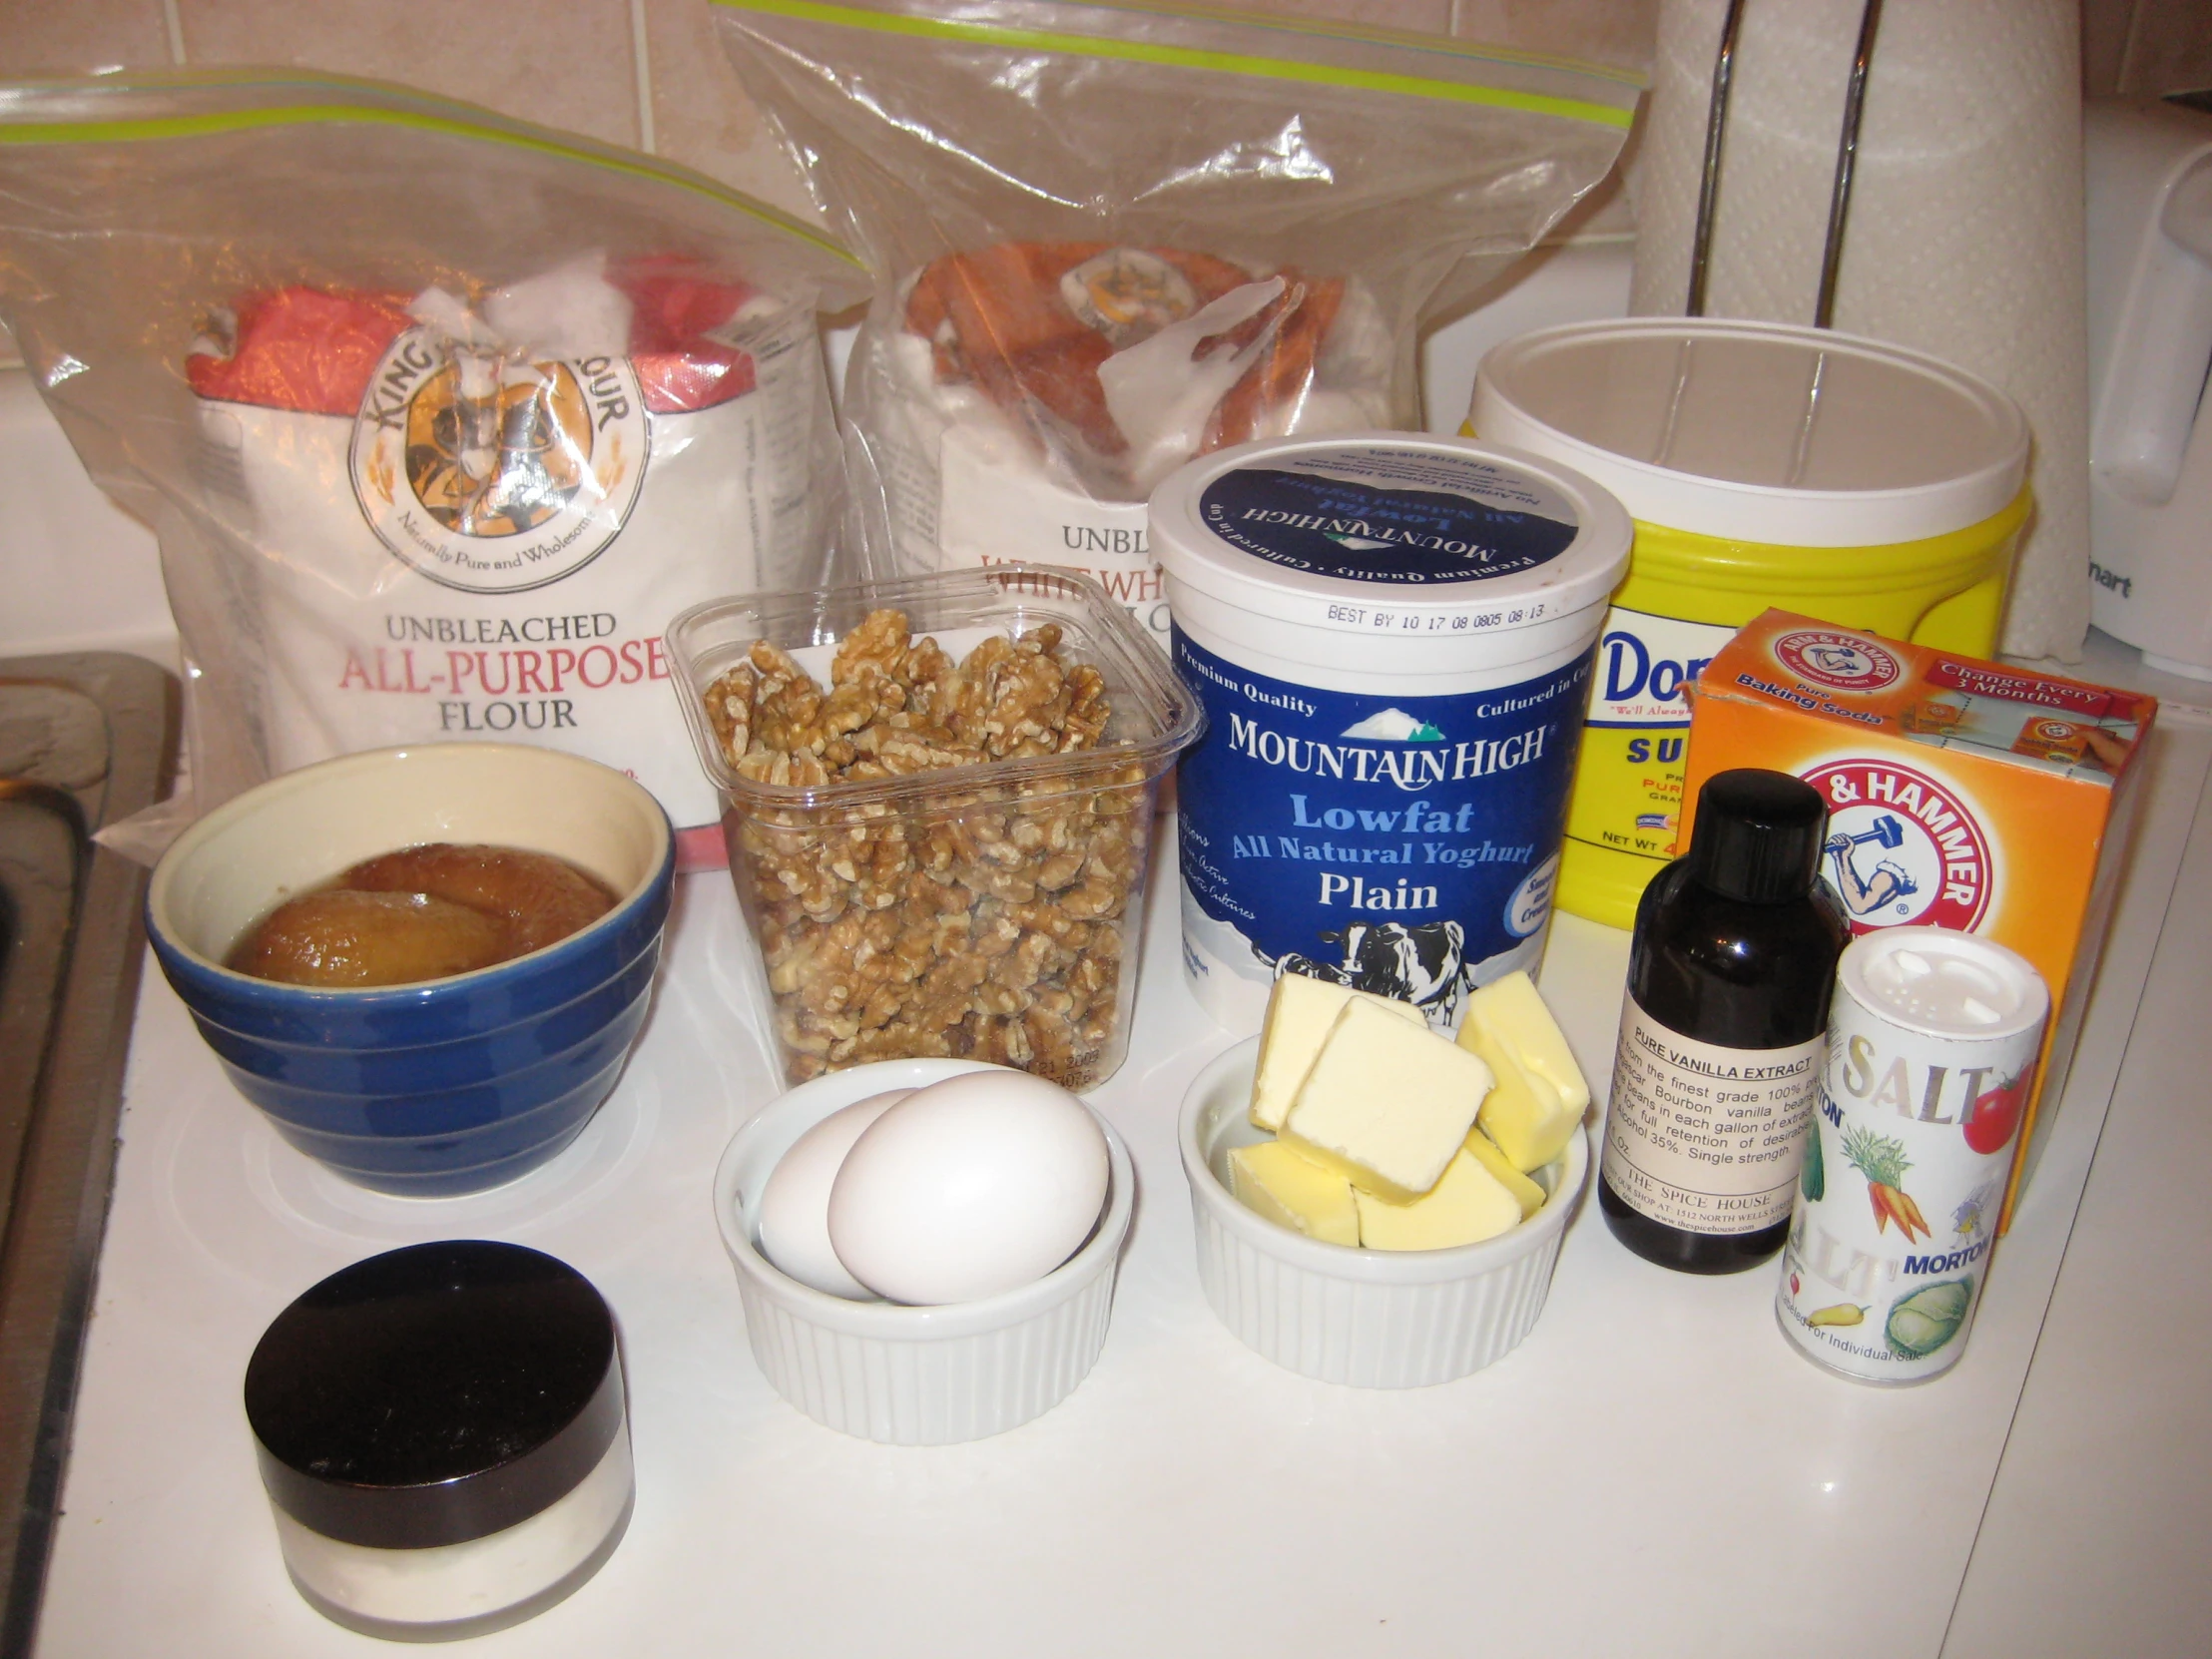 there are many items on the counter that is ready to be mixed